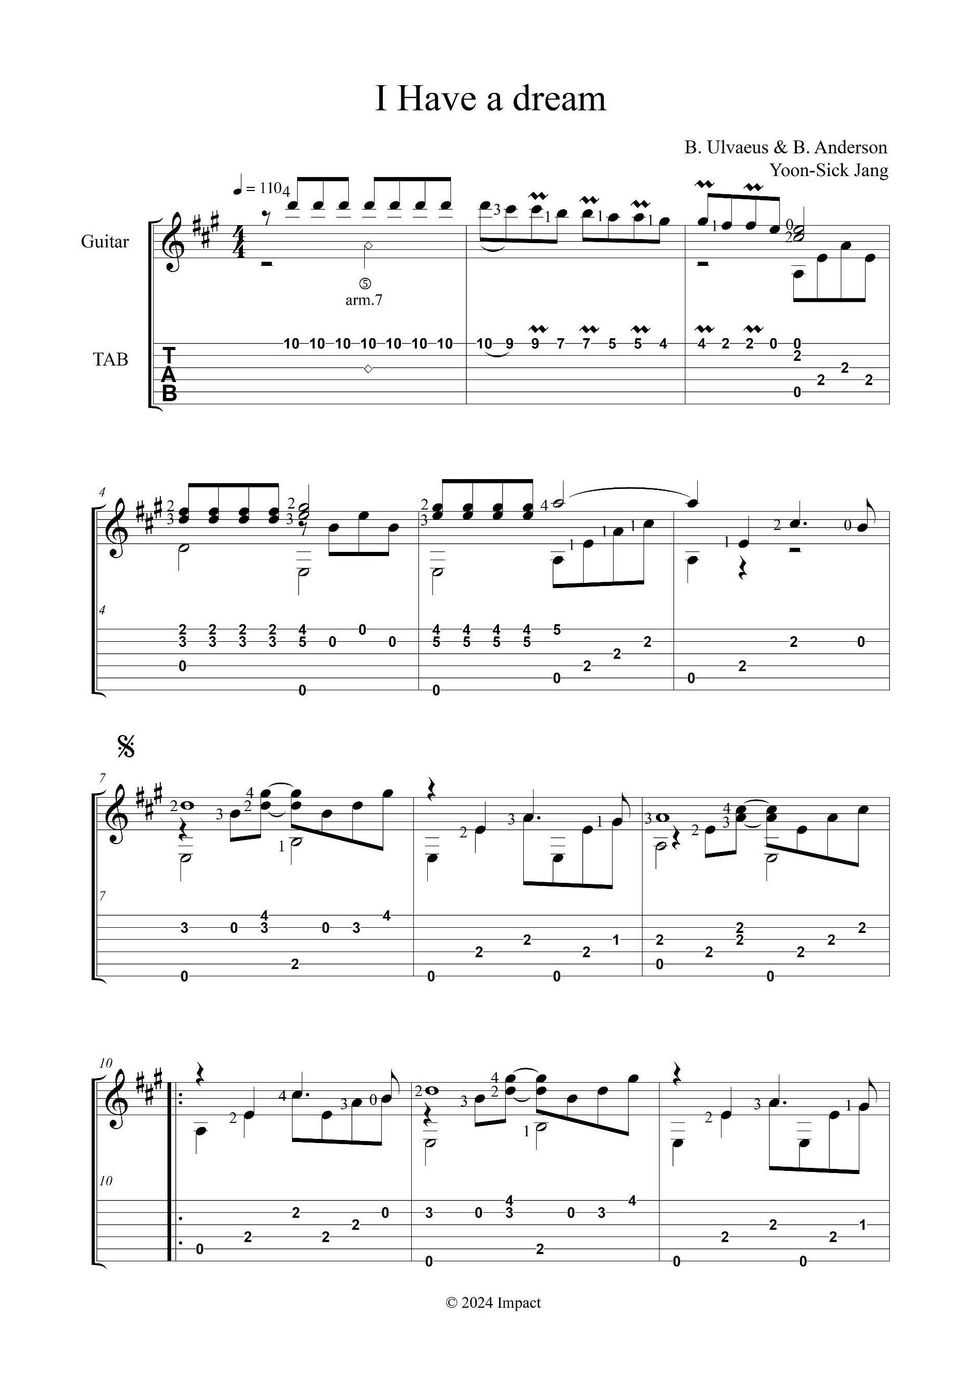 B. Ulvaeus, B. Anderson - I have a dream (a piece for guitar solo at intermediate level) by Yoon-Sick Jang